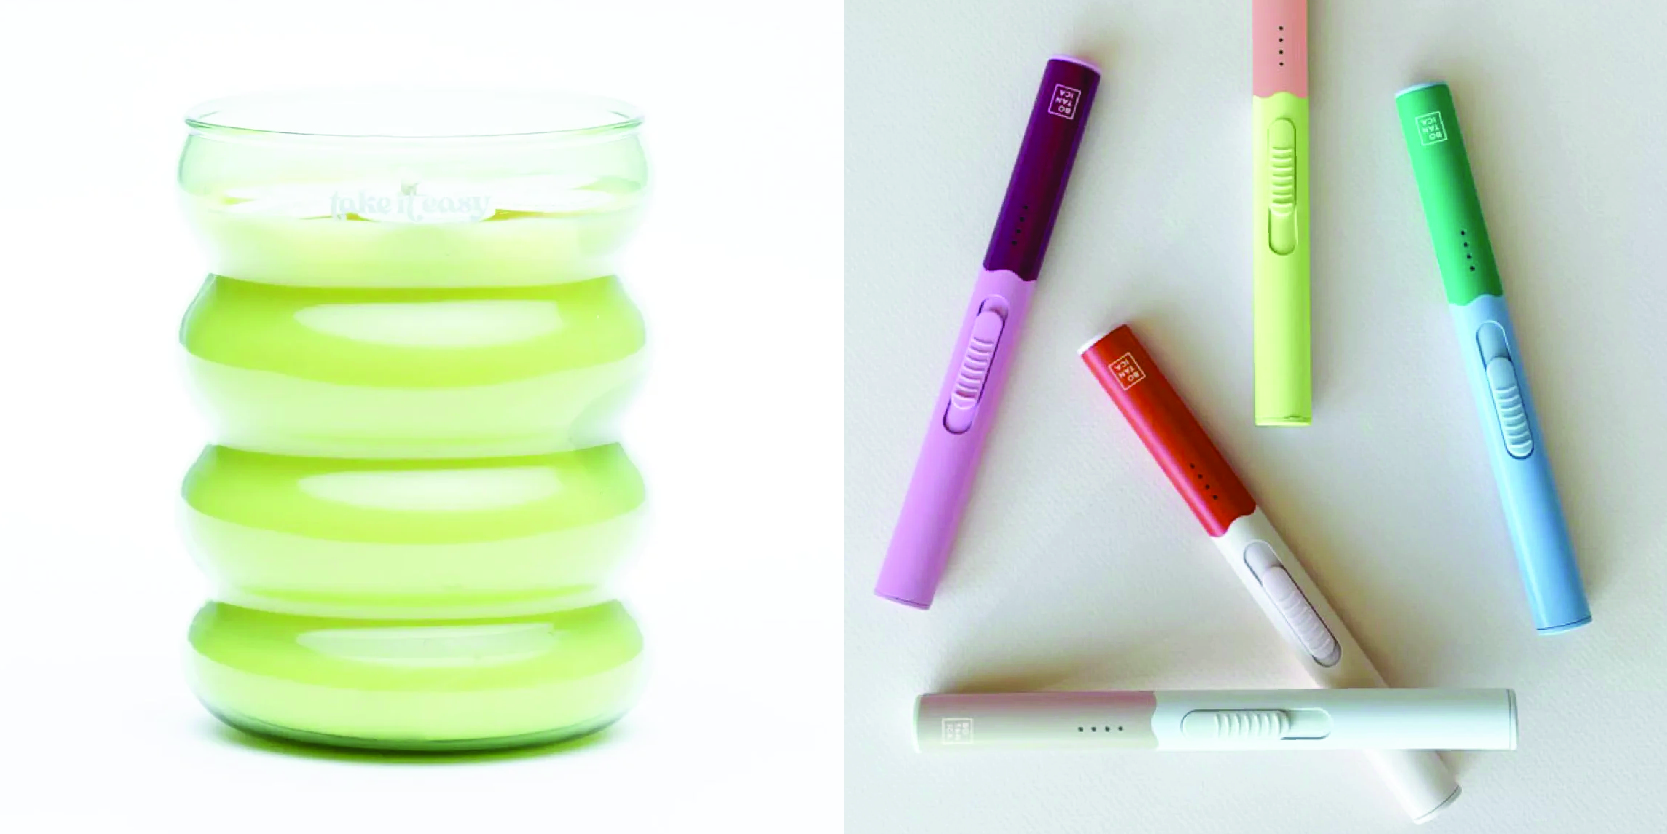 Two photos: one of a candle in a funky shape and one of a set of skinny lighters.